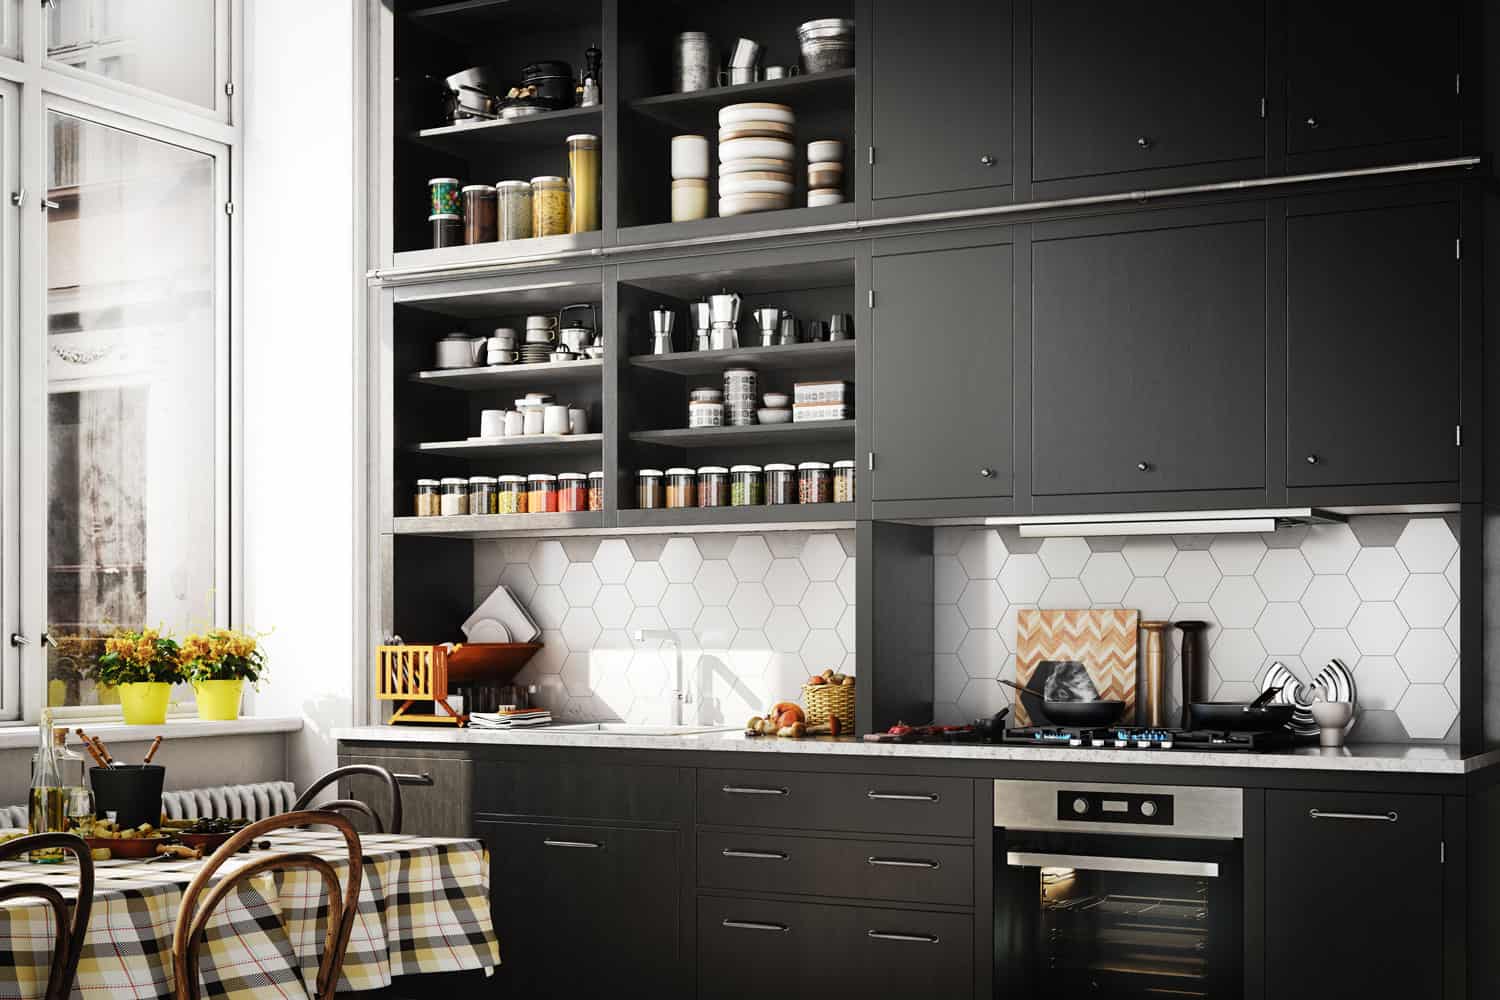 Color compatibilities of kitchen cabinet and black stainless appliances